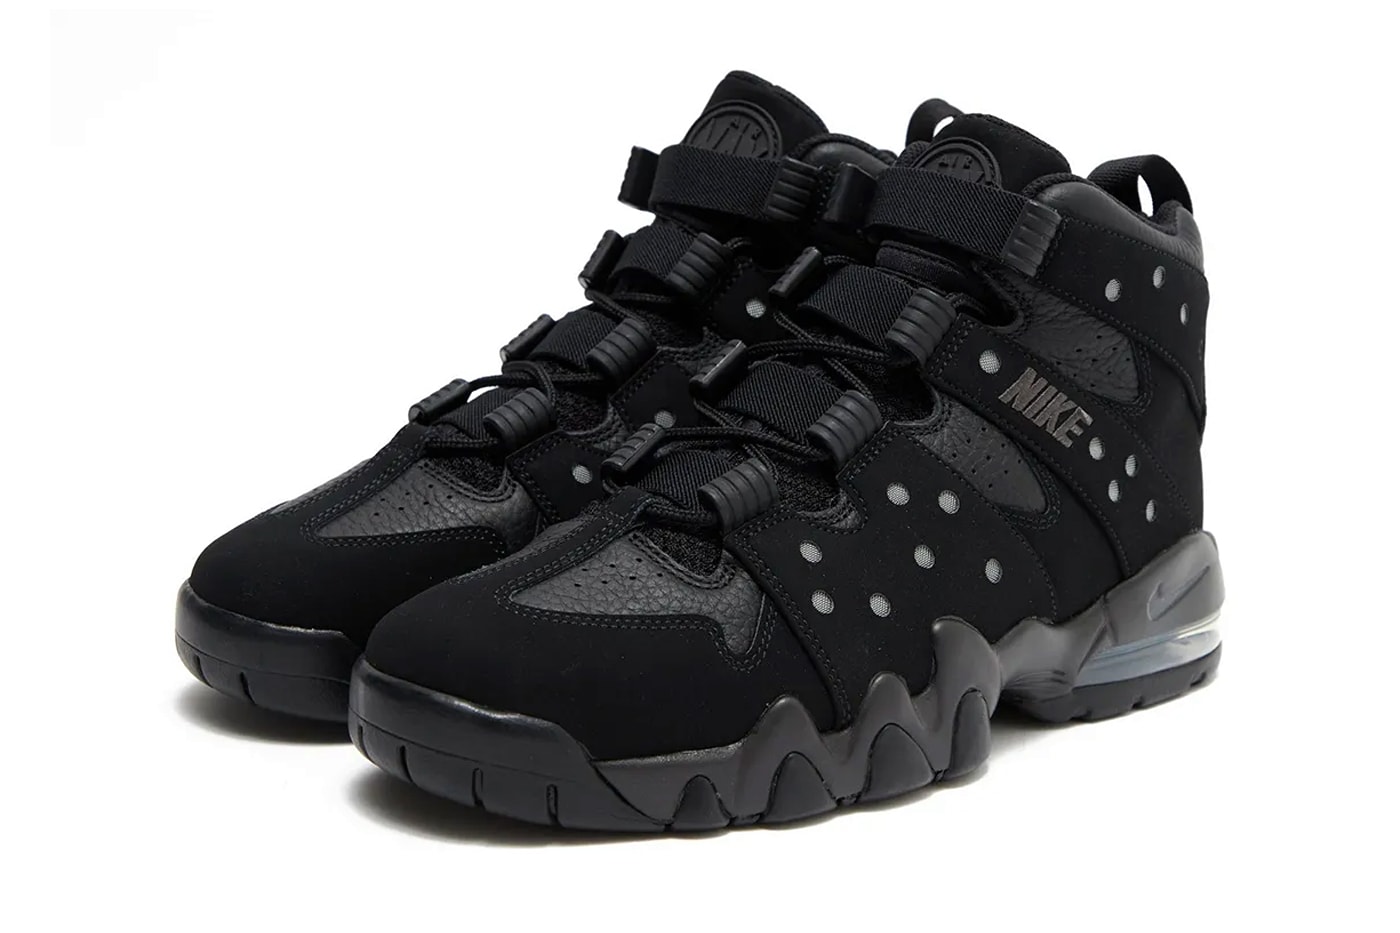 Take a First Look at the Nike Air Max CB 94 "Black/Dark Charcoal" charles barkely 